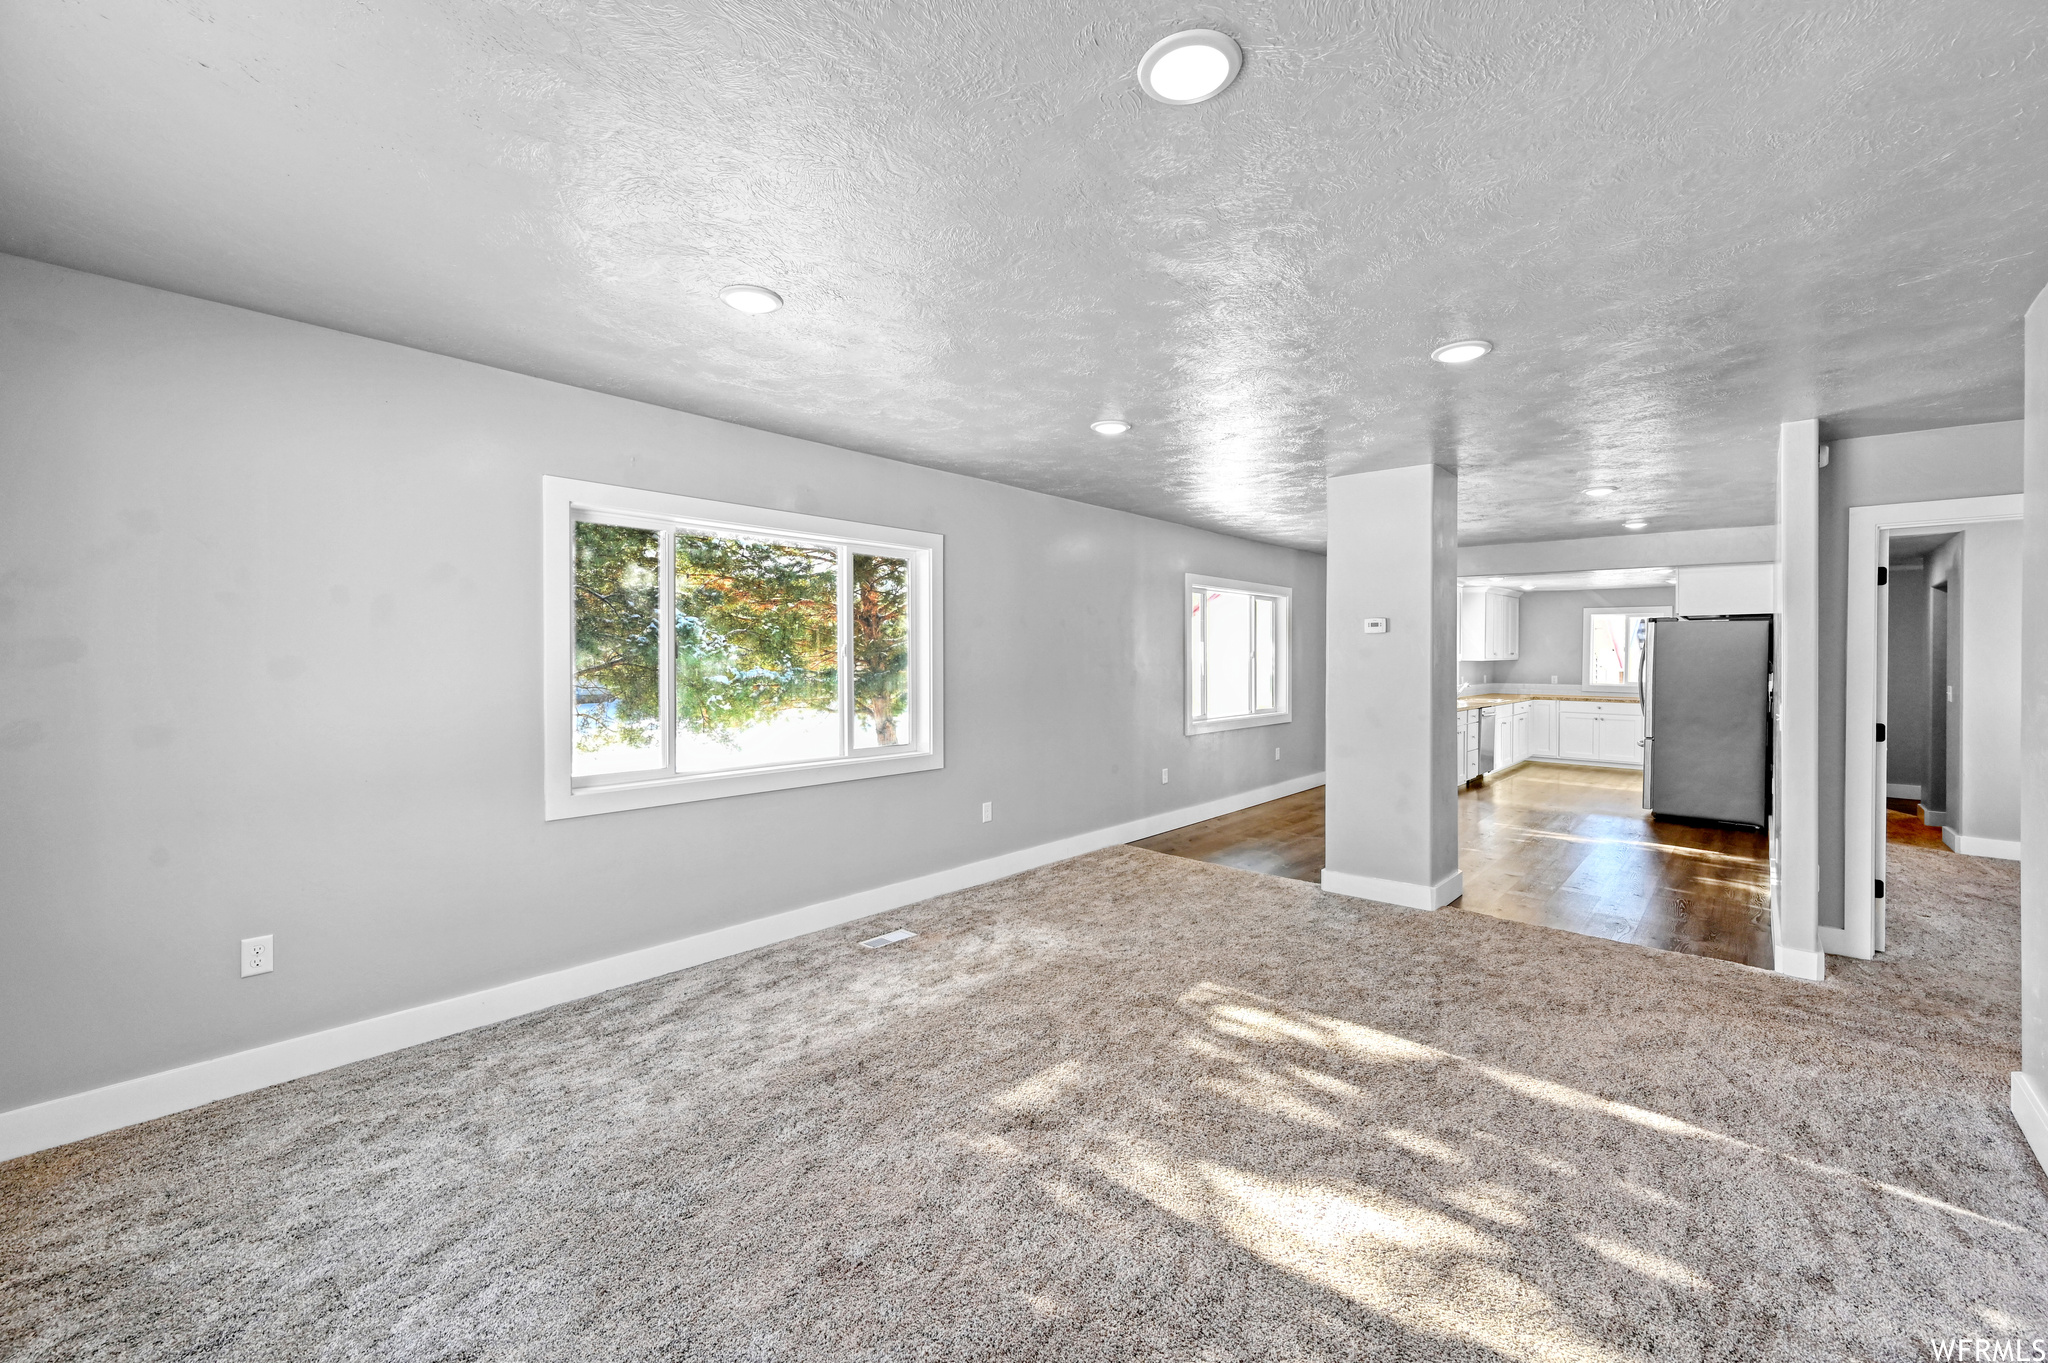 Unfurnished living room with carpet and a textured ceiling